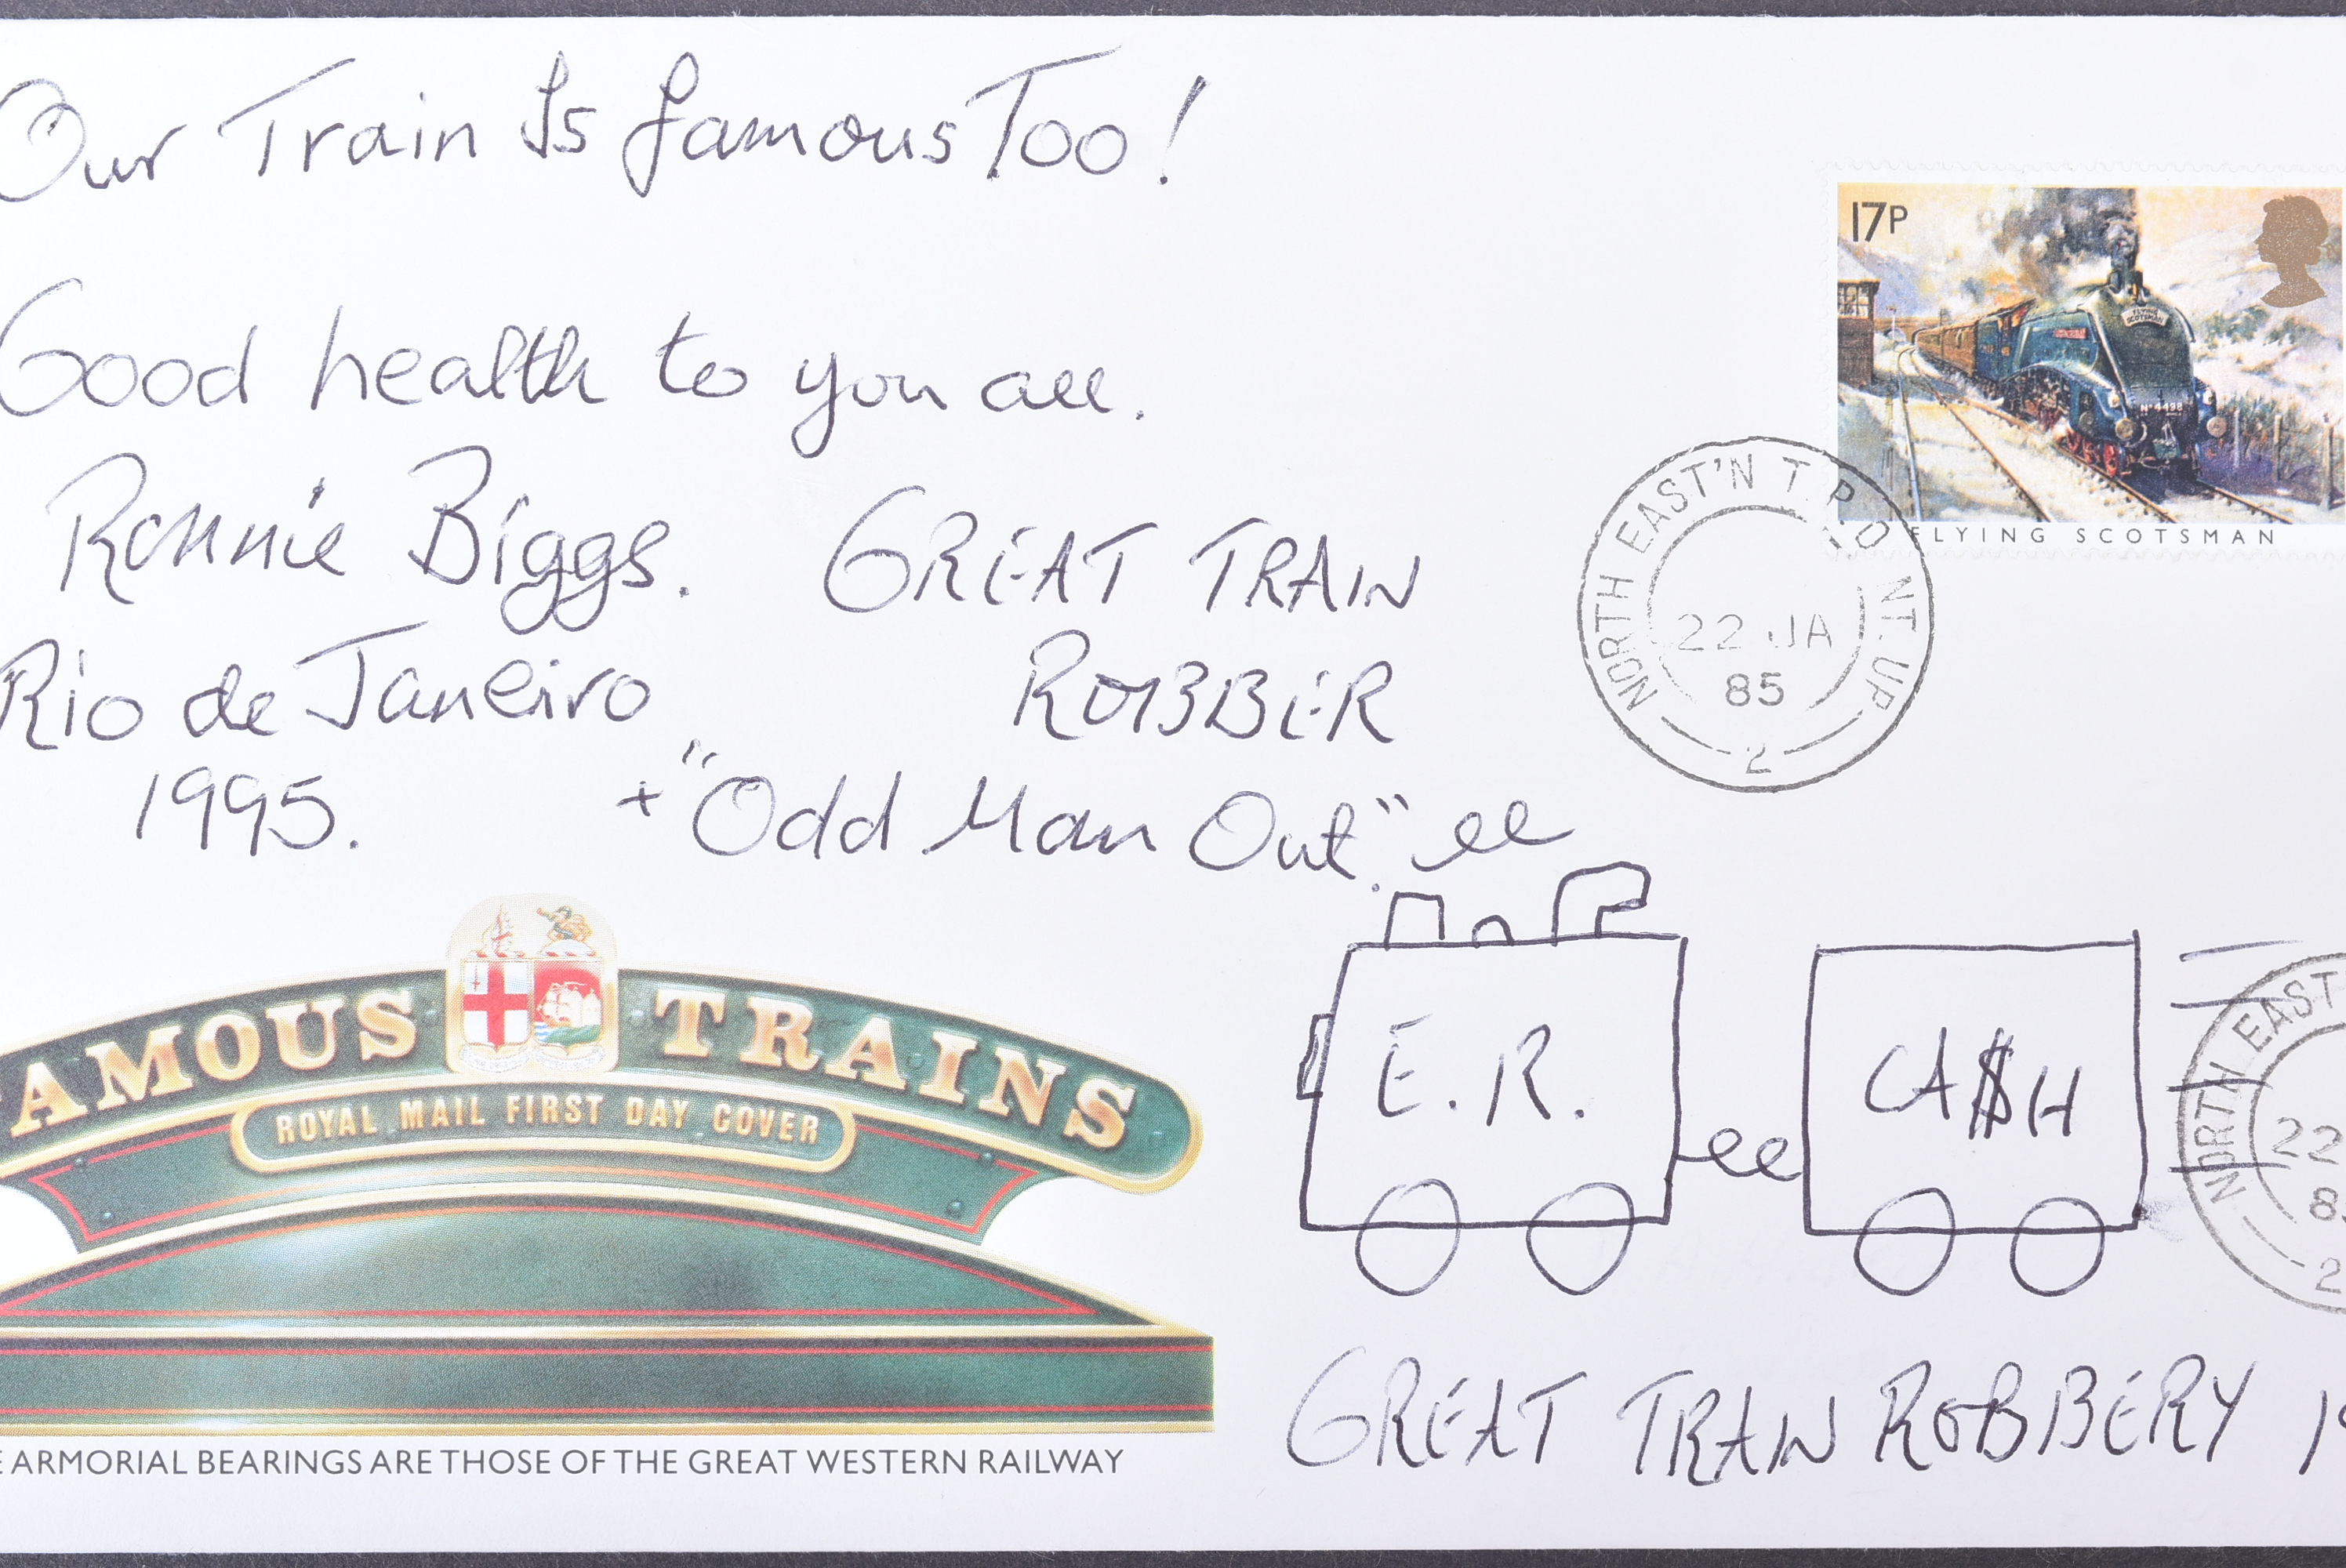 THE GREAT TRAIN ROBBERY - RONNIE BIGGS SIGNED FDC - Image 2 of 2